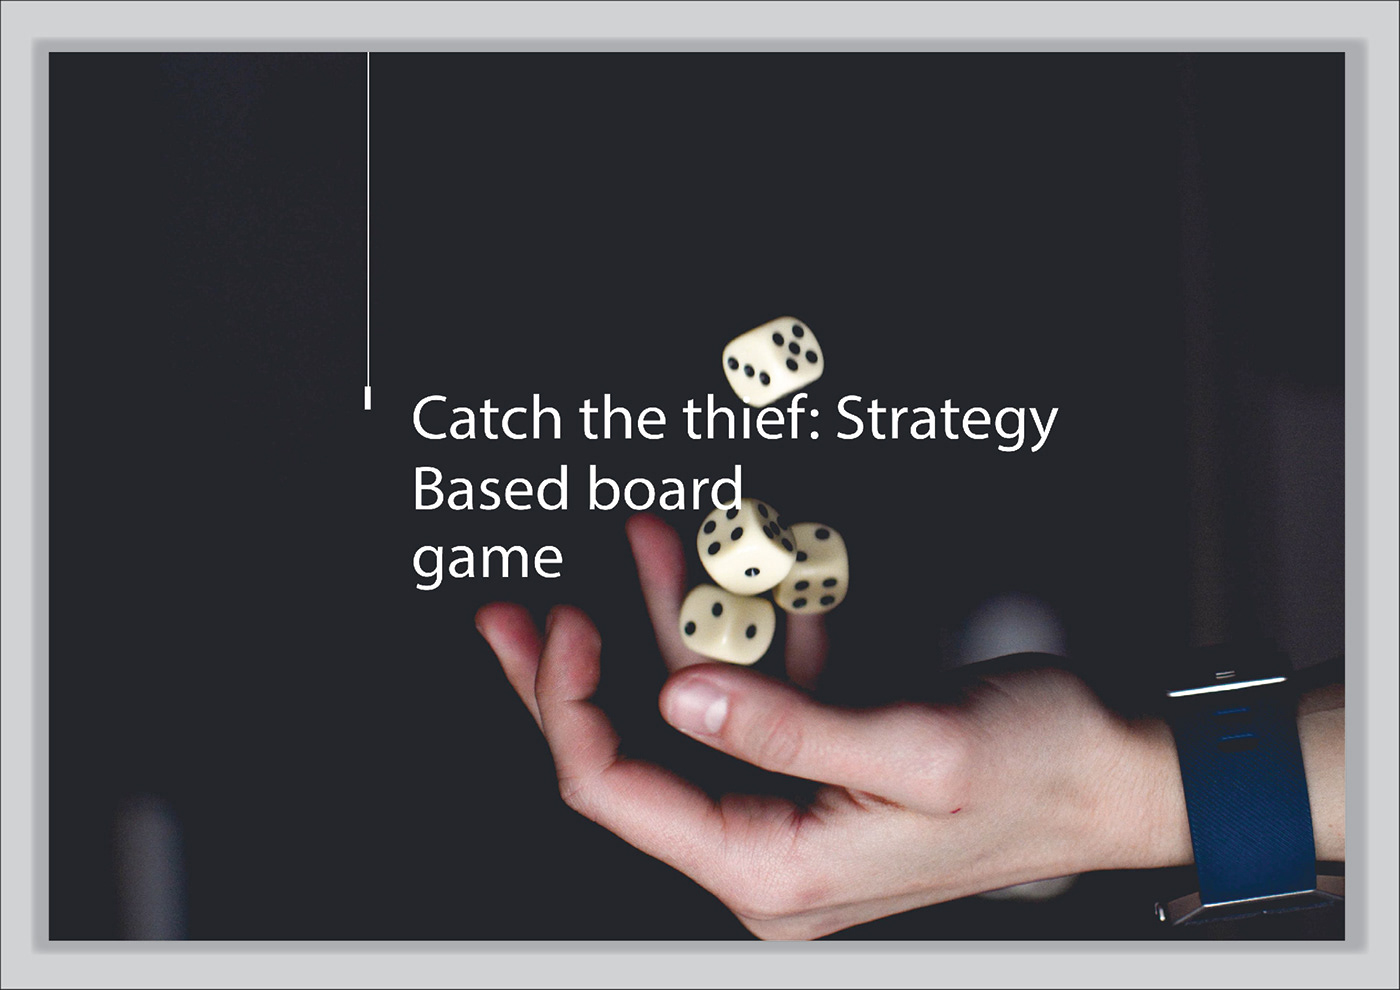 board game game game design  Gaming puzzles strategy game Toy & Game ty & game design